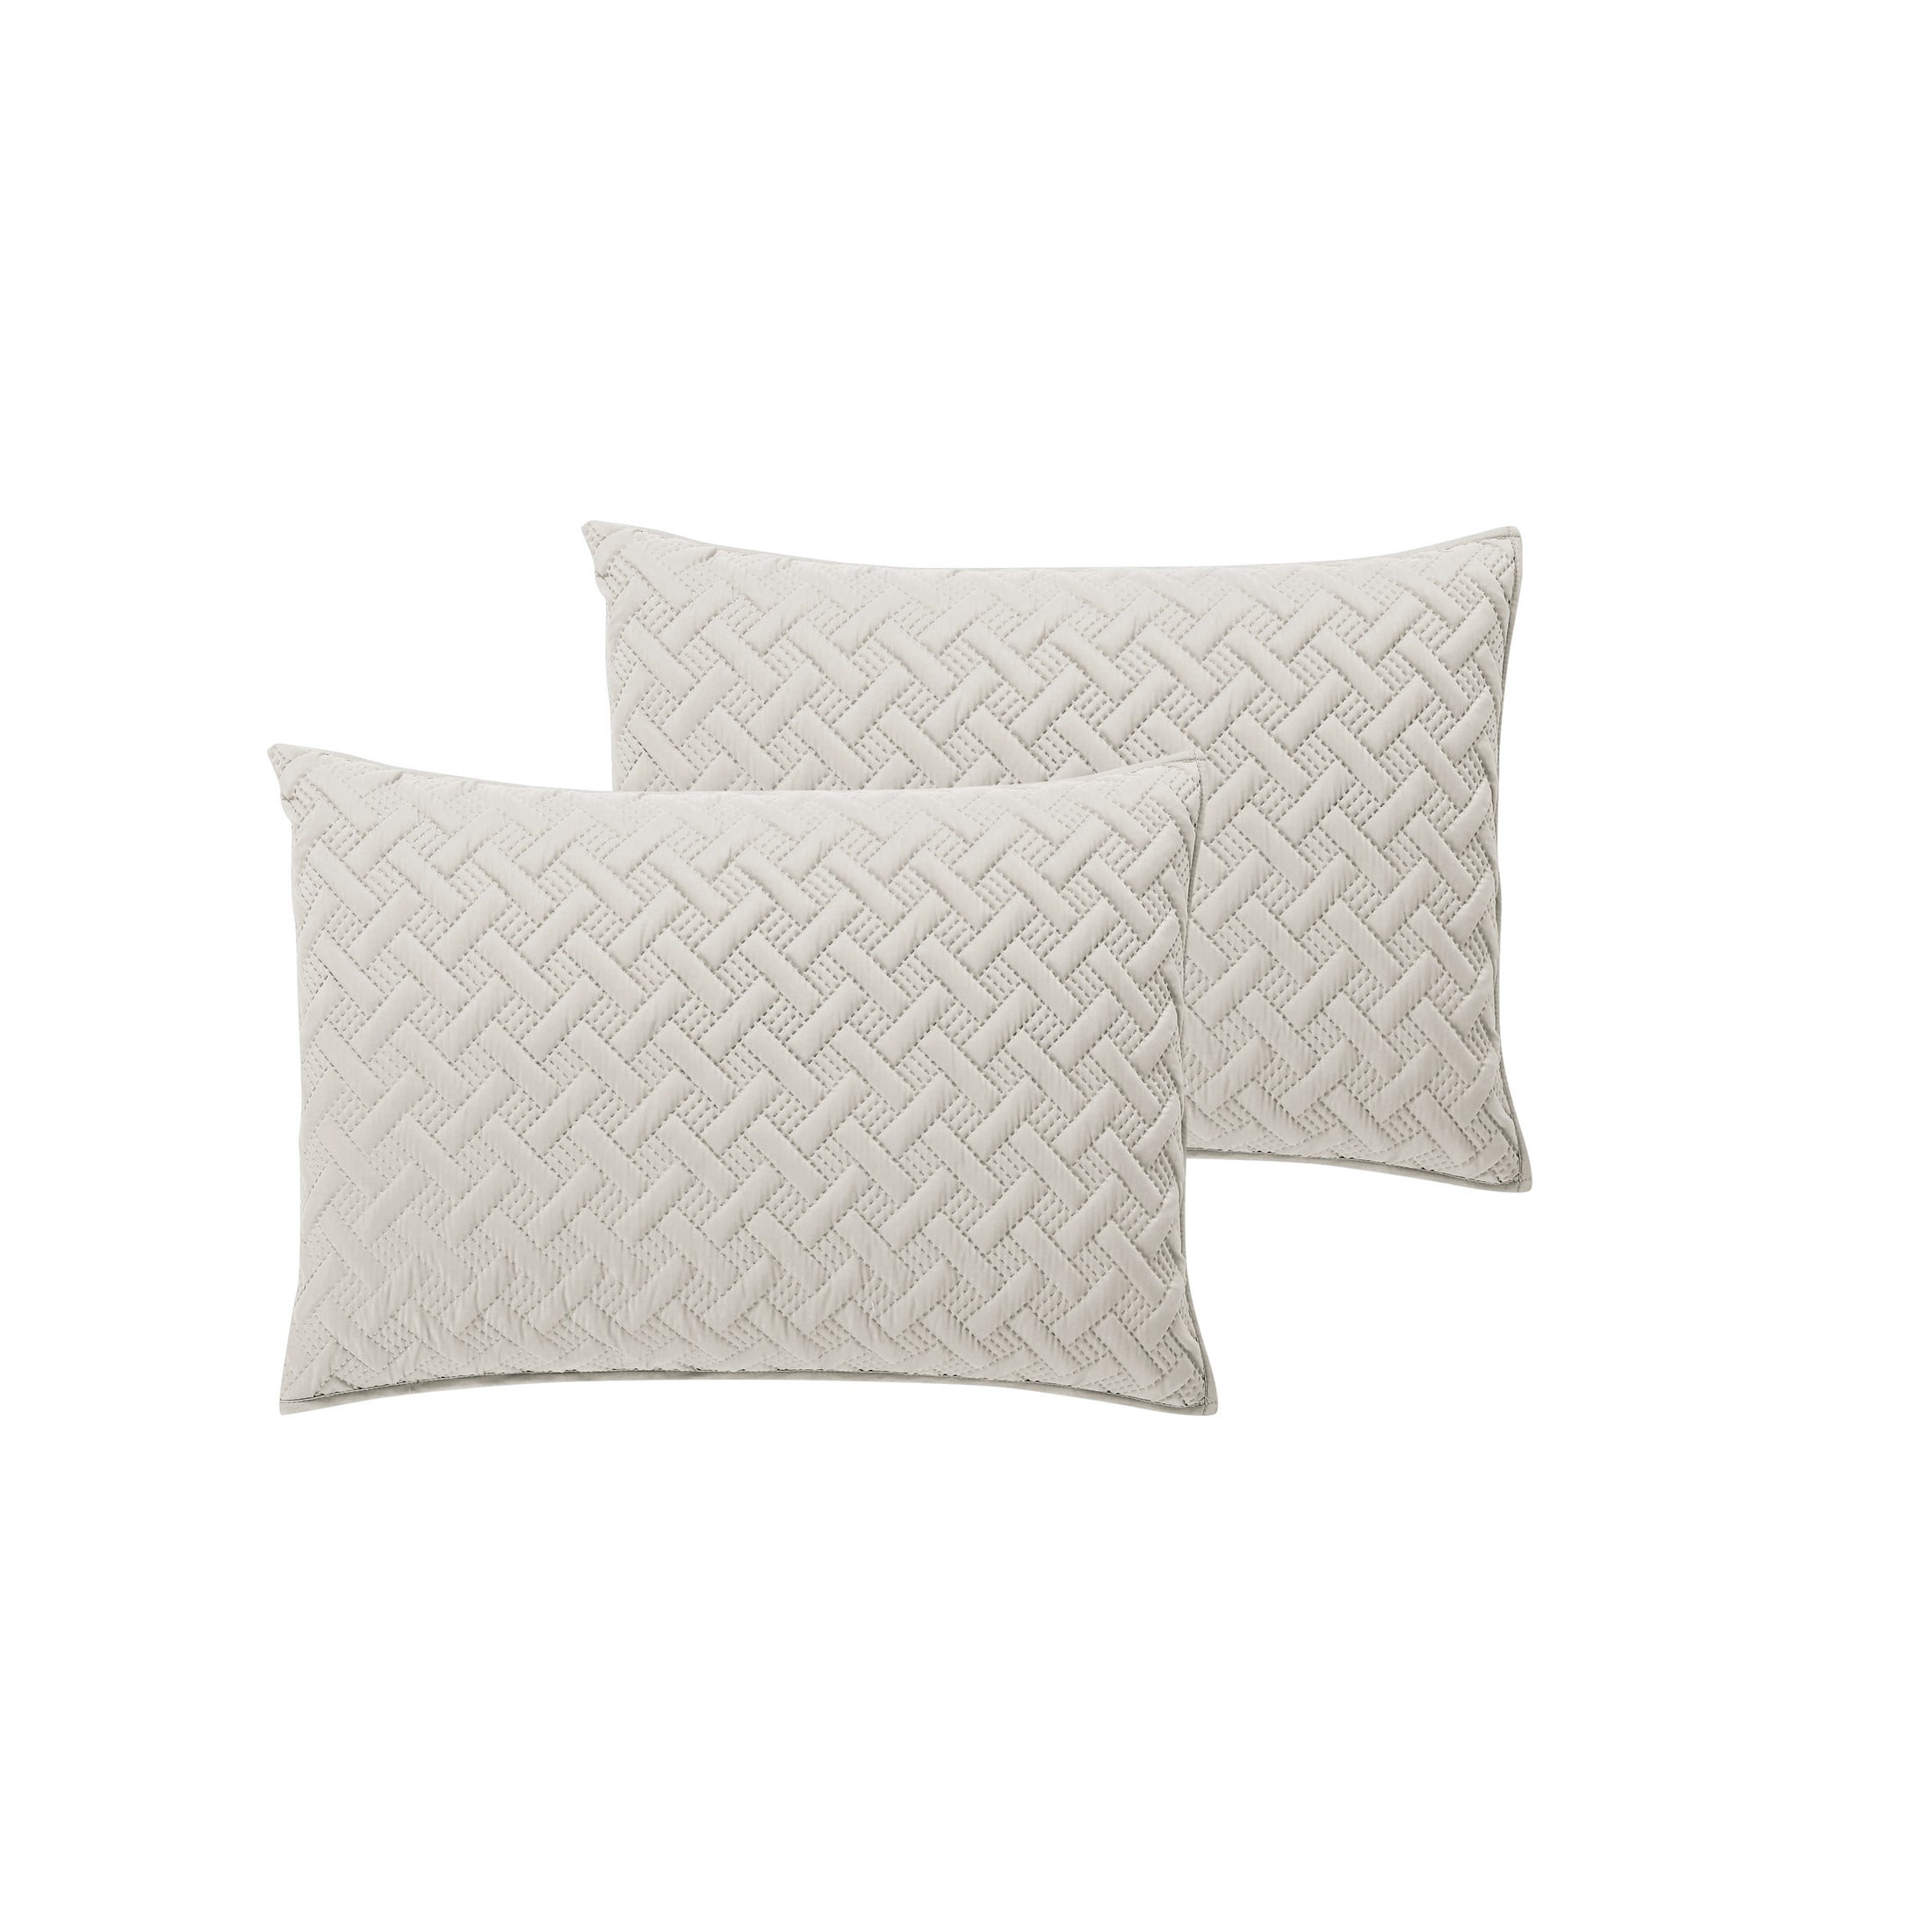 Mainstays Solid Basketweave king size Pillow Sham ivory 20 X 36" New 